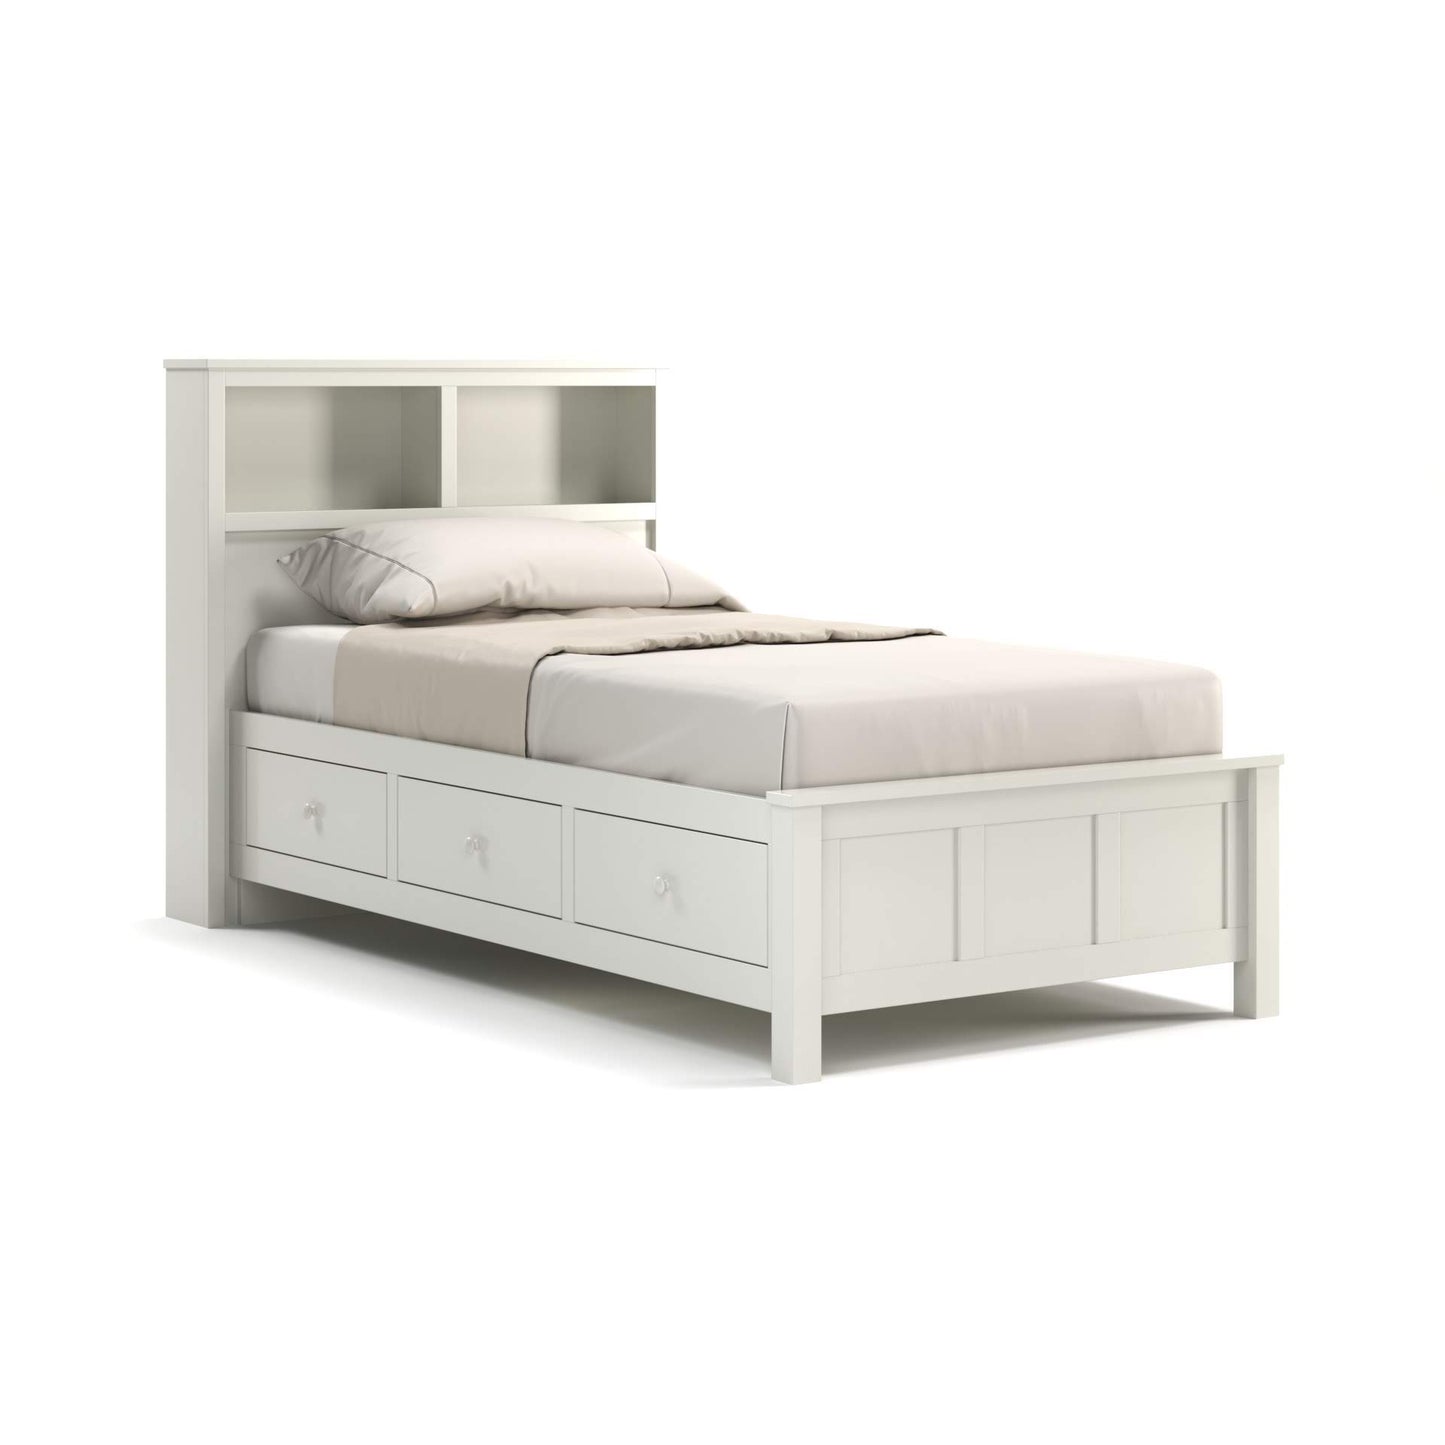 Acadia Tremont Storage Bed with Bookcase Headboard and Three Drawers is built in birch and has three drawers on one side as well as storage space in the headboard. Shown in white.